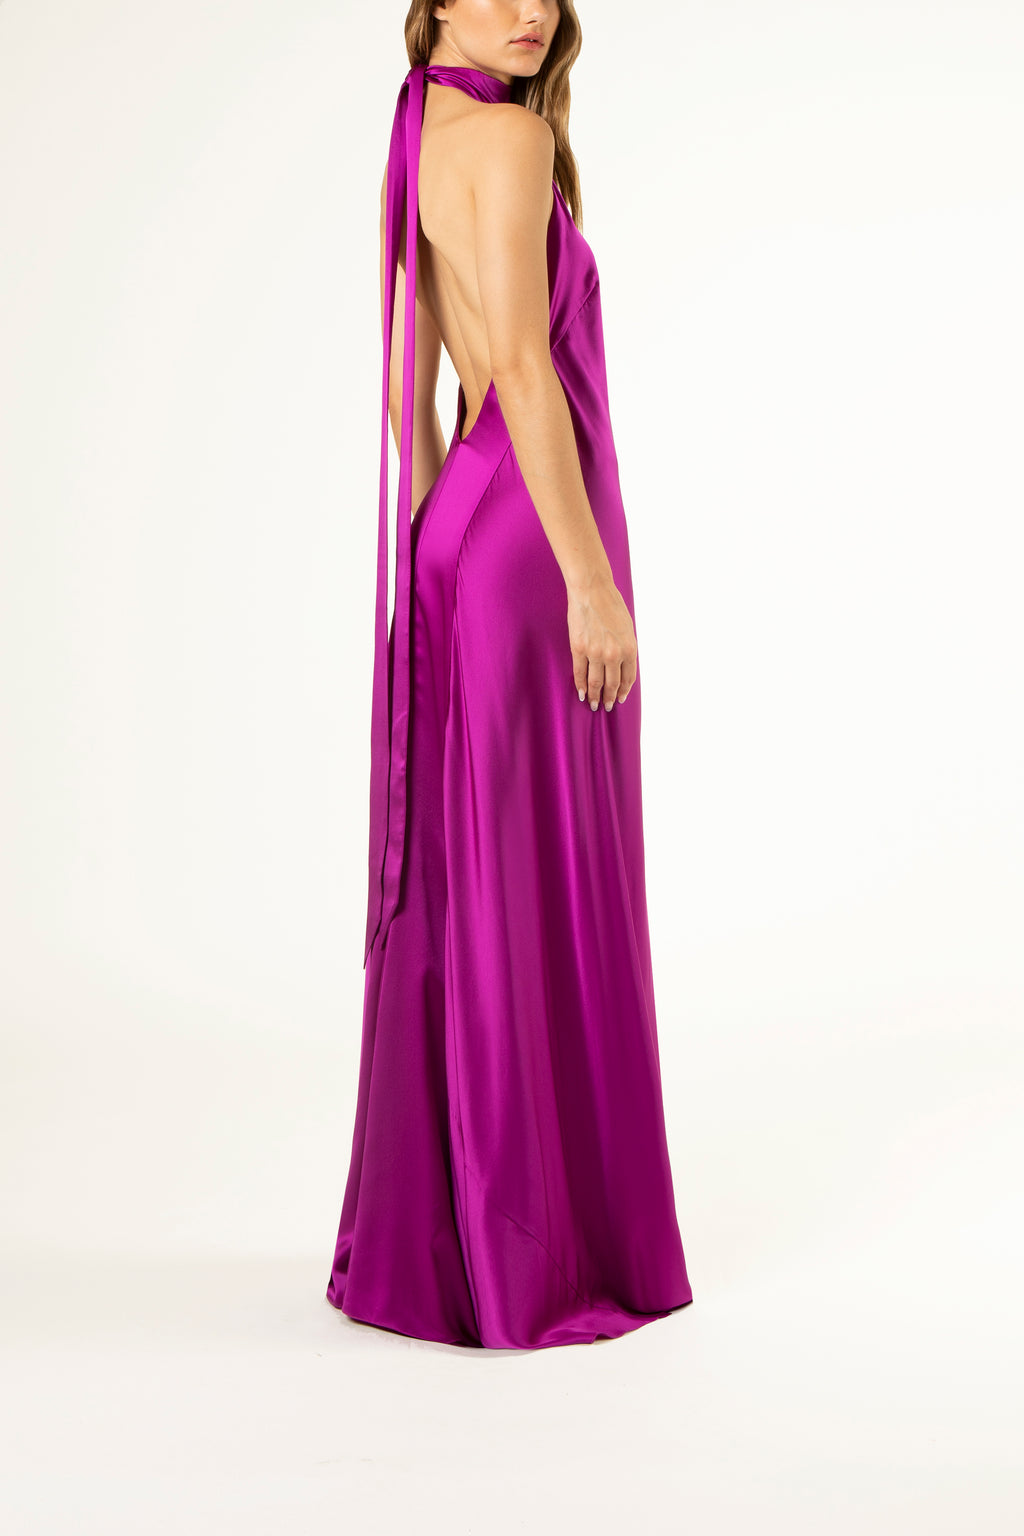 Halter tie neck backless gown - orchid – Michelle Mason